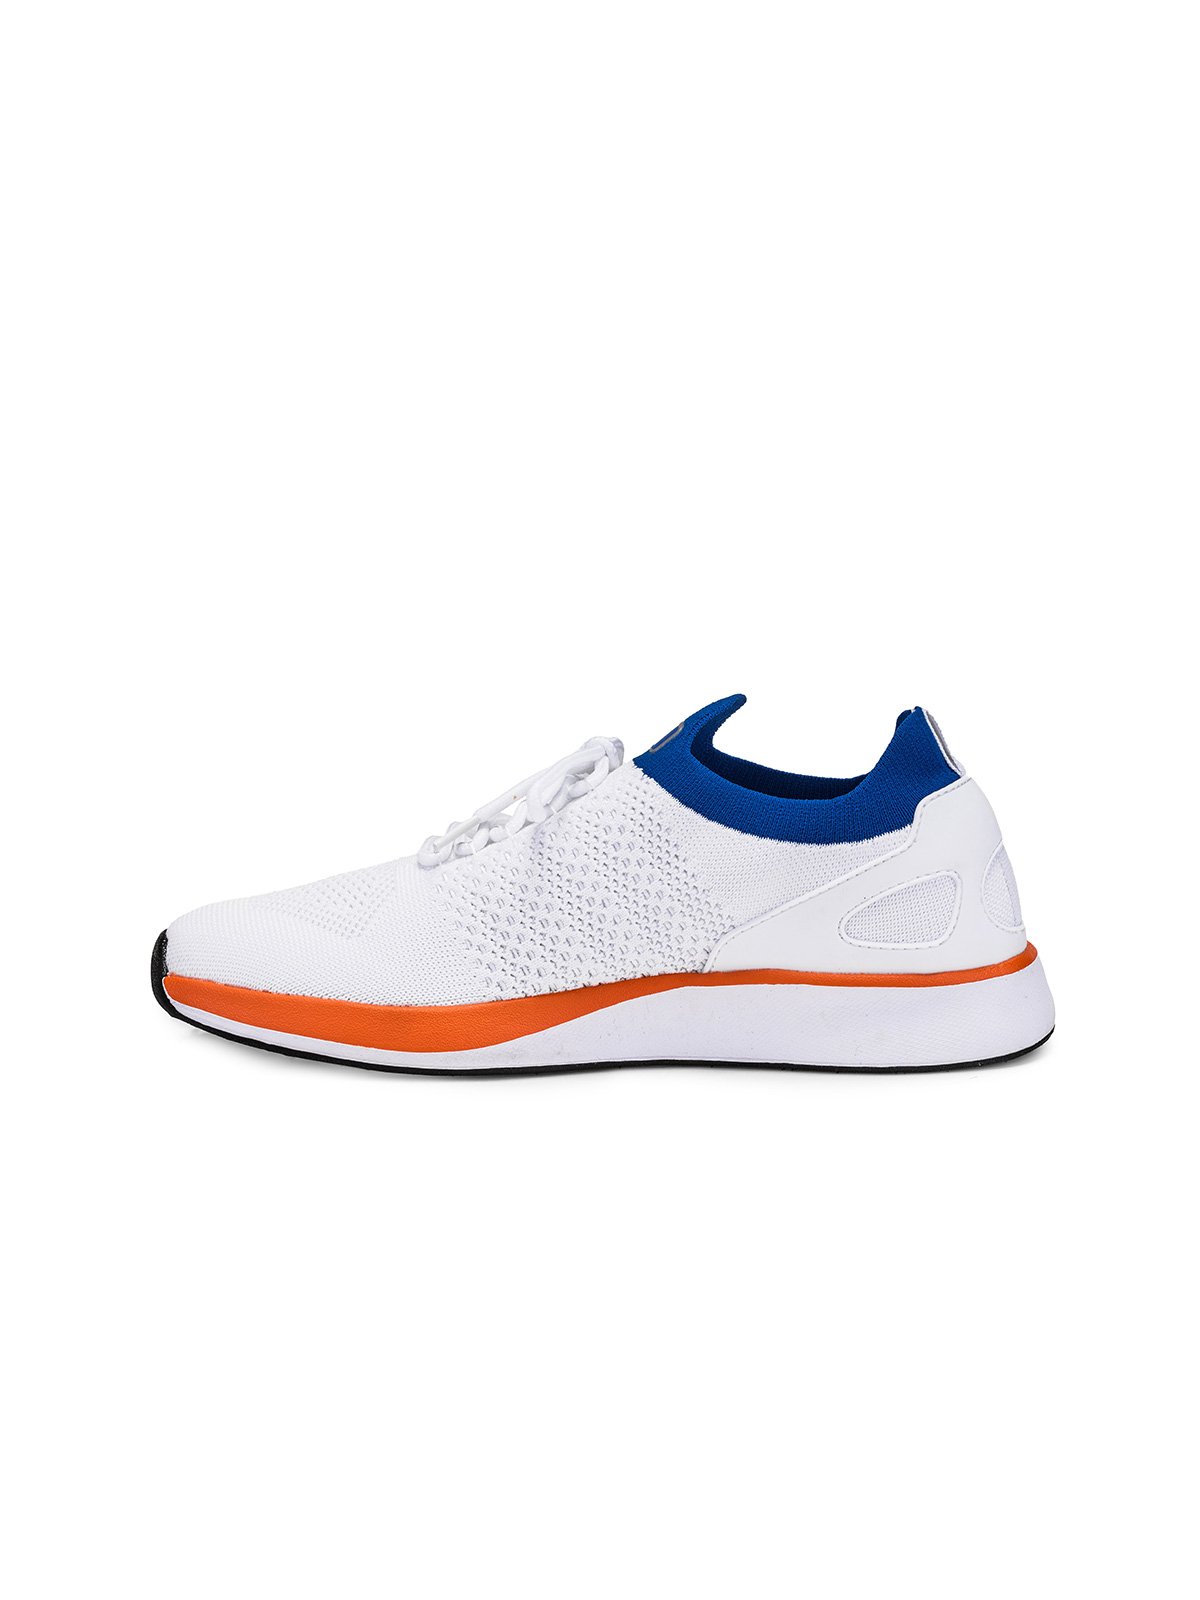 mens latest trainers 219